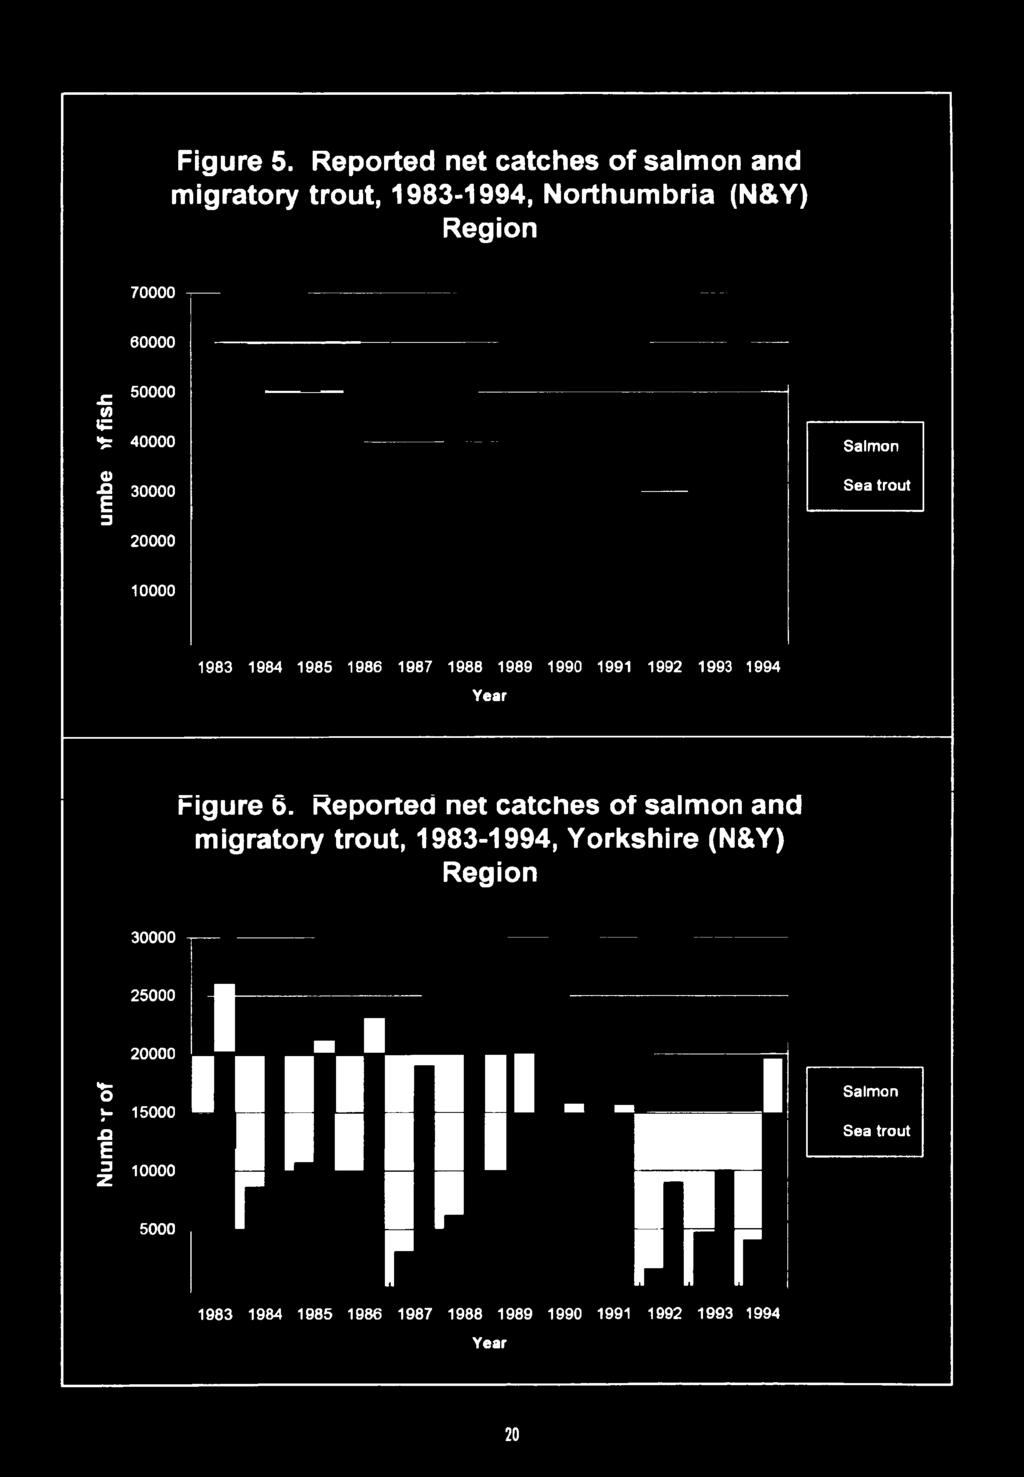 Reported net catches of salmon and migratory trout, 1983-1994, Yorkshire (N&Y)